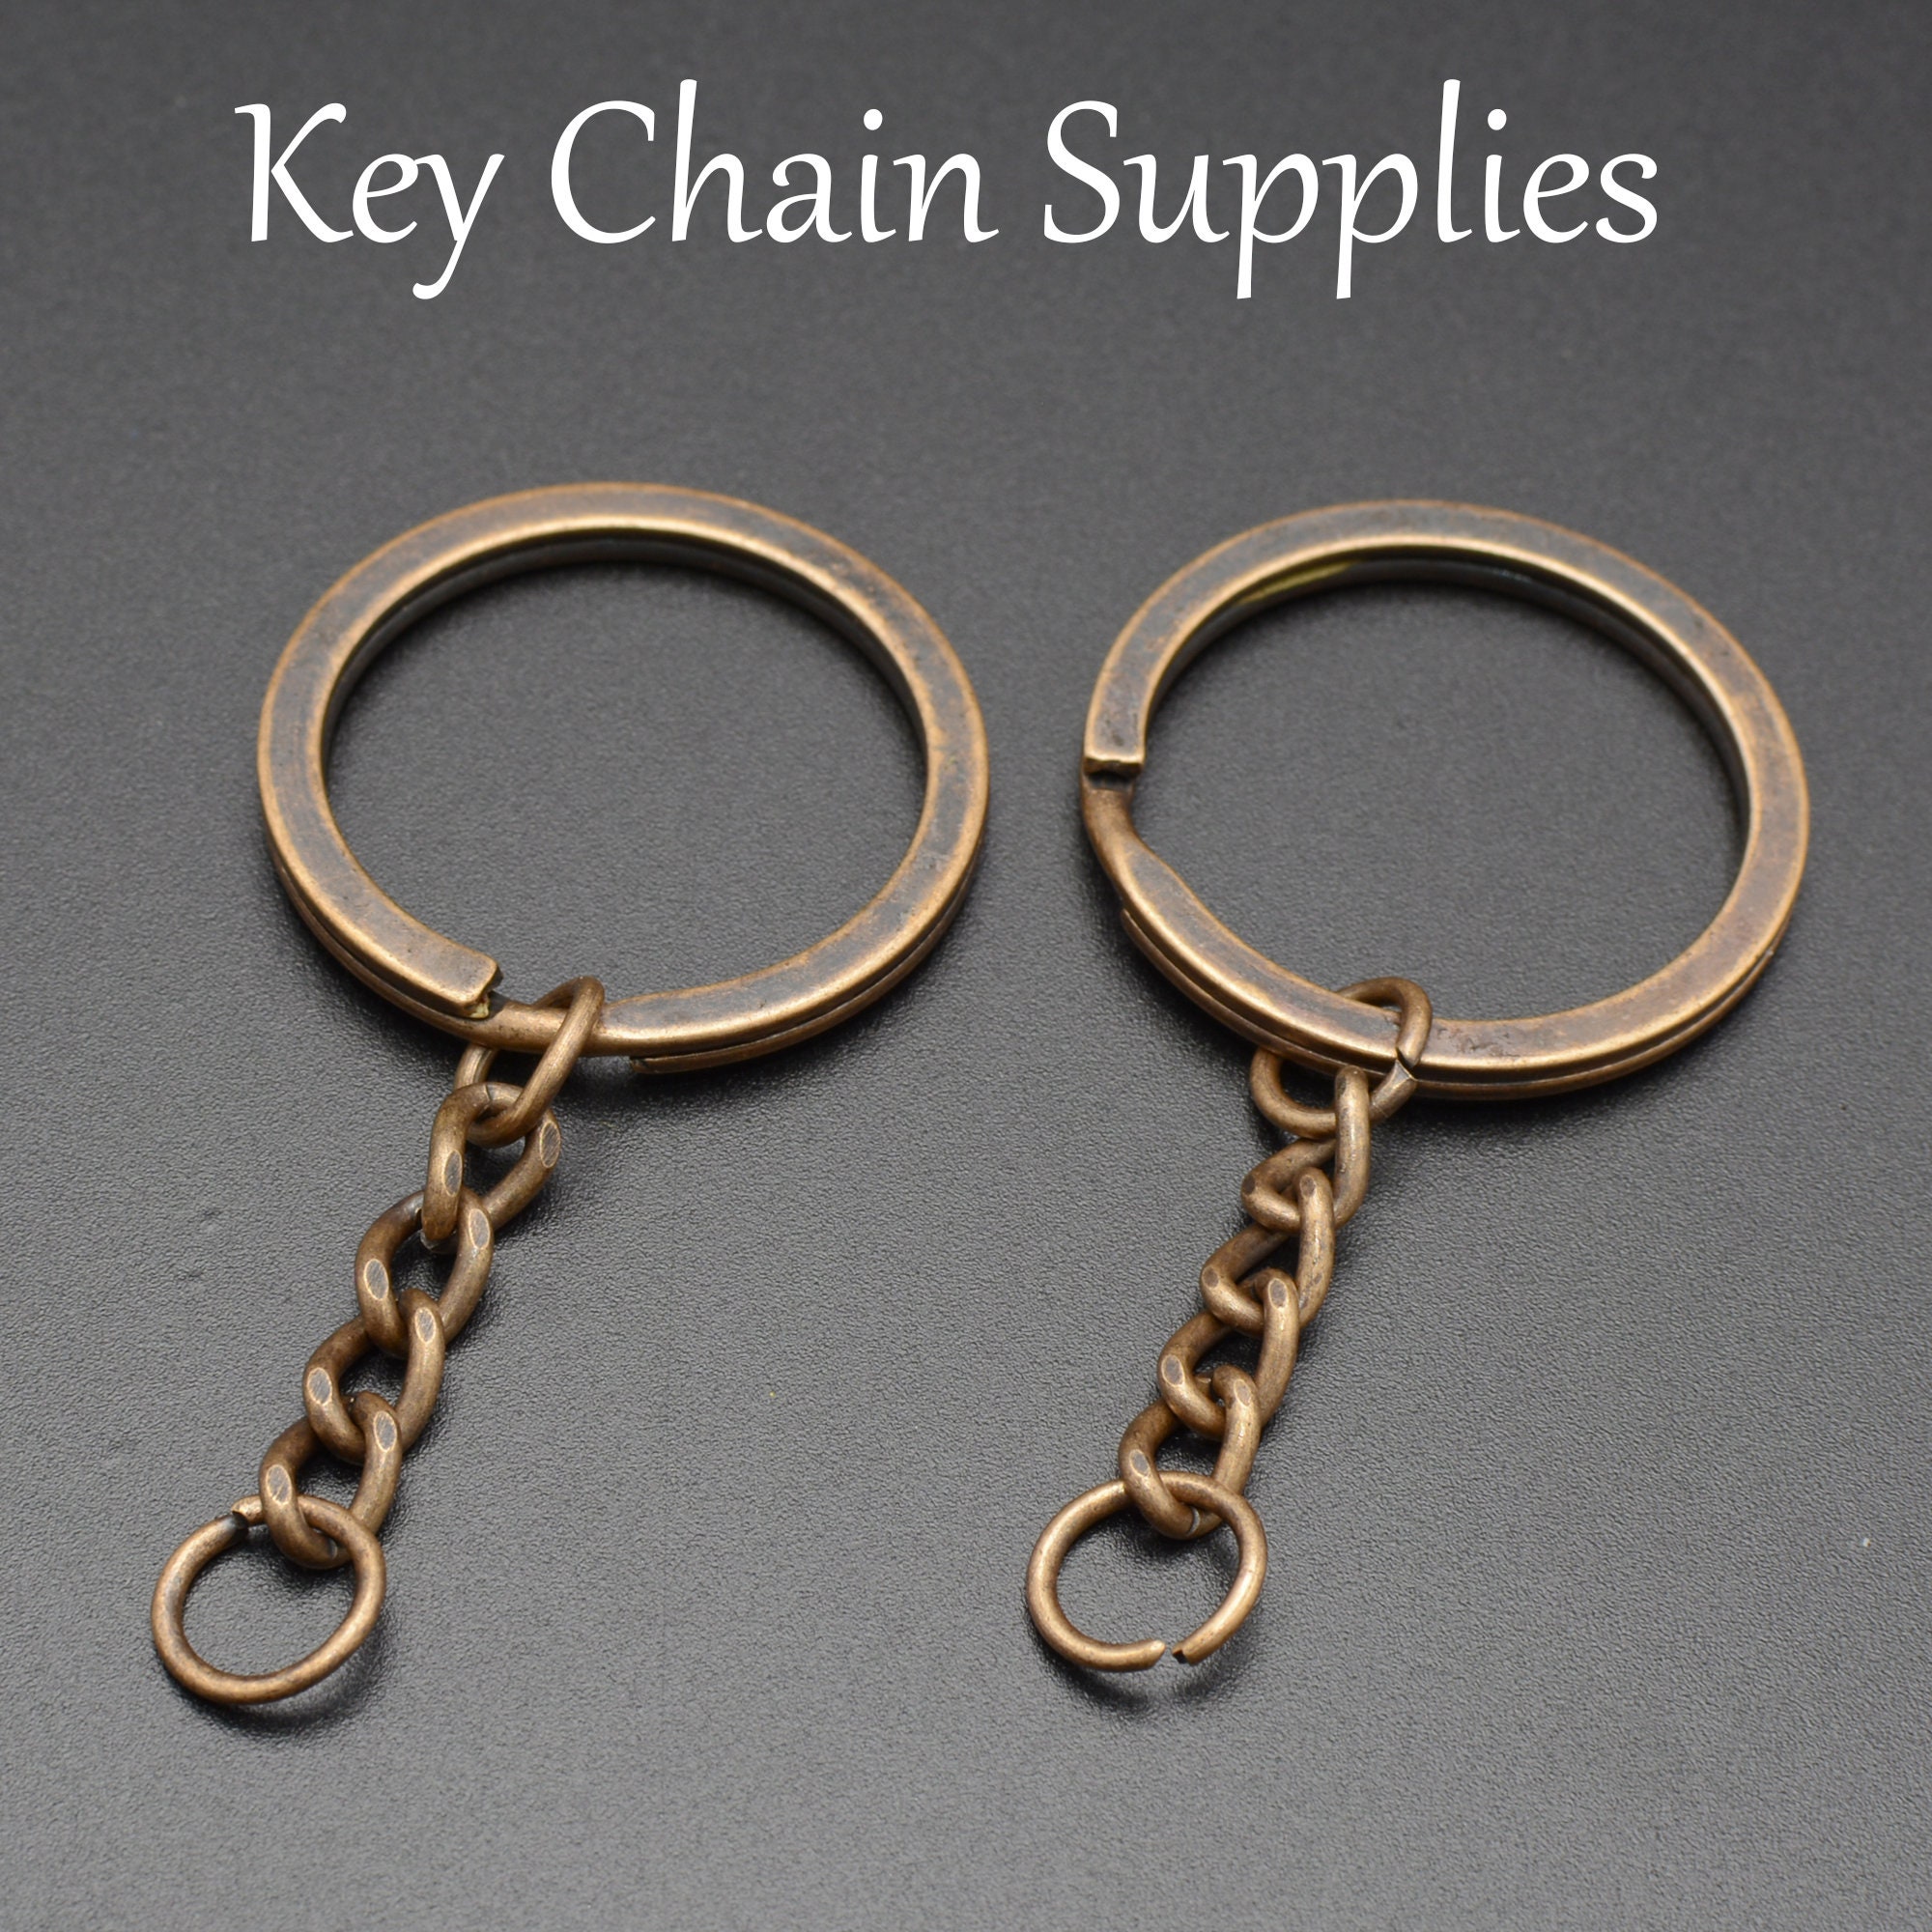 10/50 Keychain Supplies, Key Chain Keyring Wholesale, Big Lobster Clasp Chain  Key Ring Jump Rings Bronze/gold/copper/silver/gold 14K 